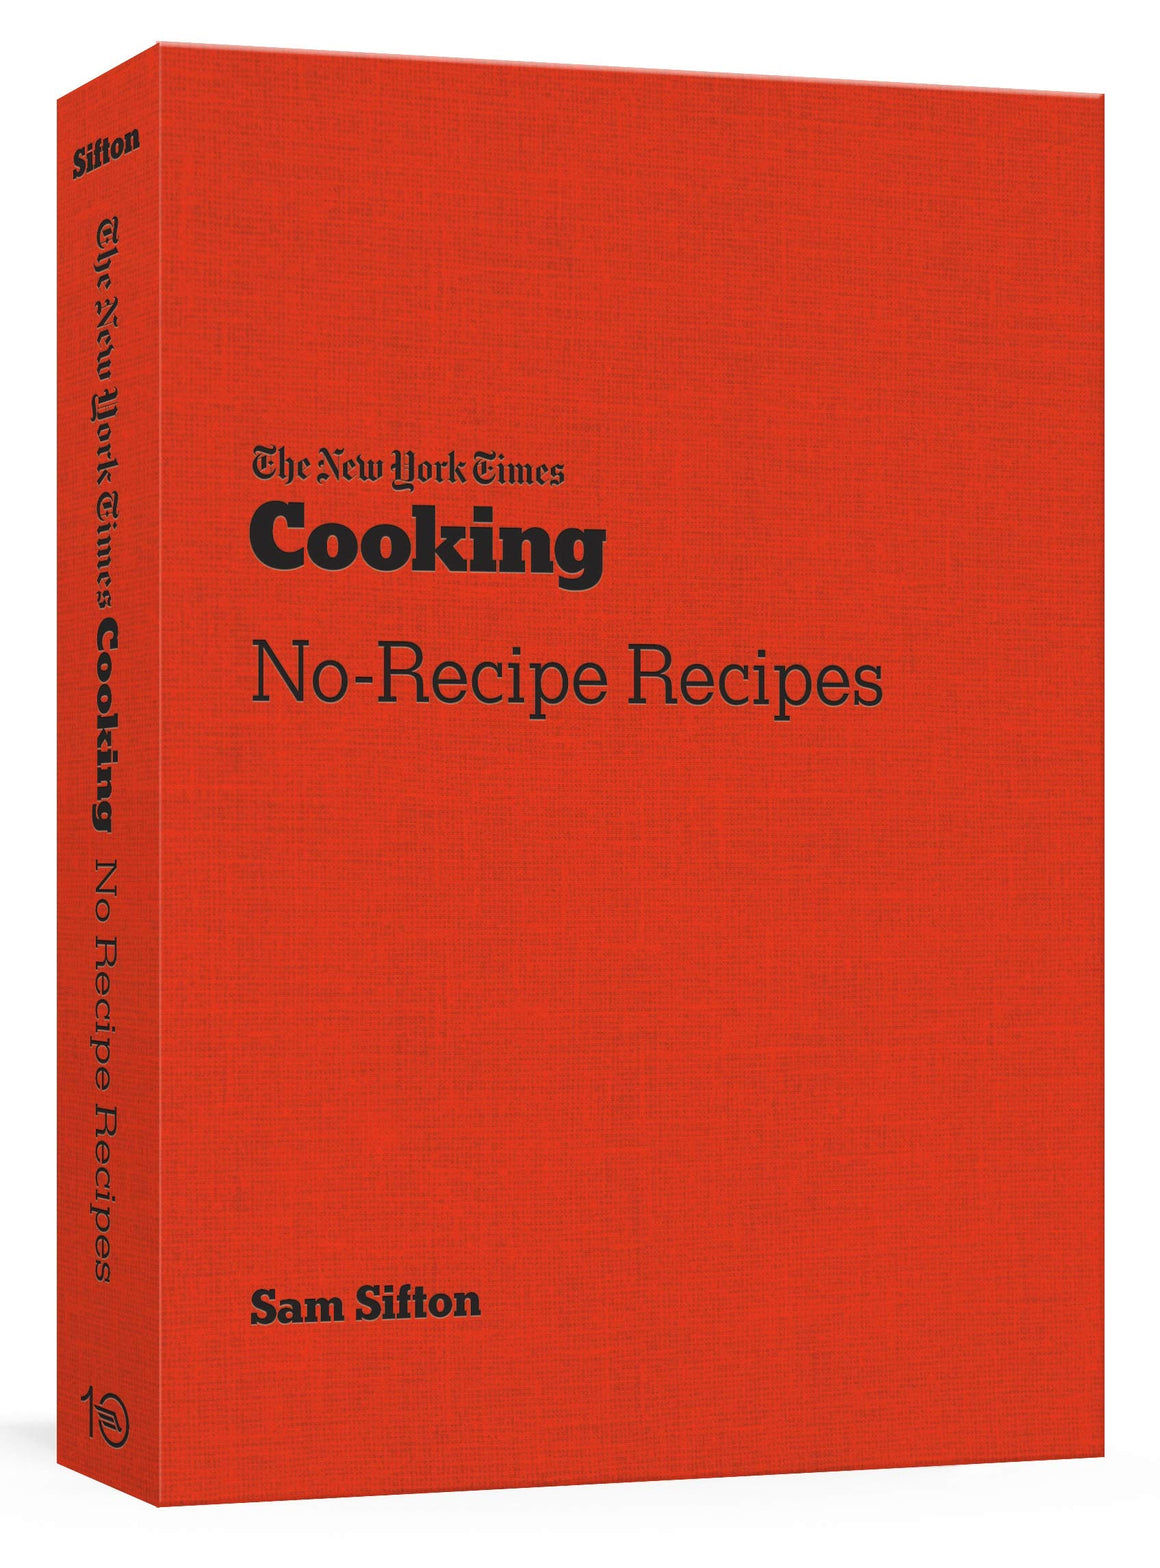 (GENERAL) Sam Sifton. The New York Times Cooking No-Recipe Recipes.